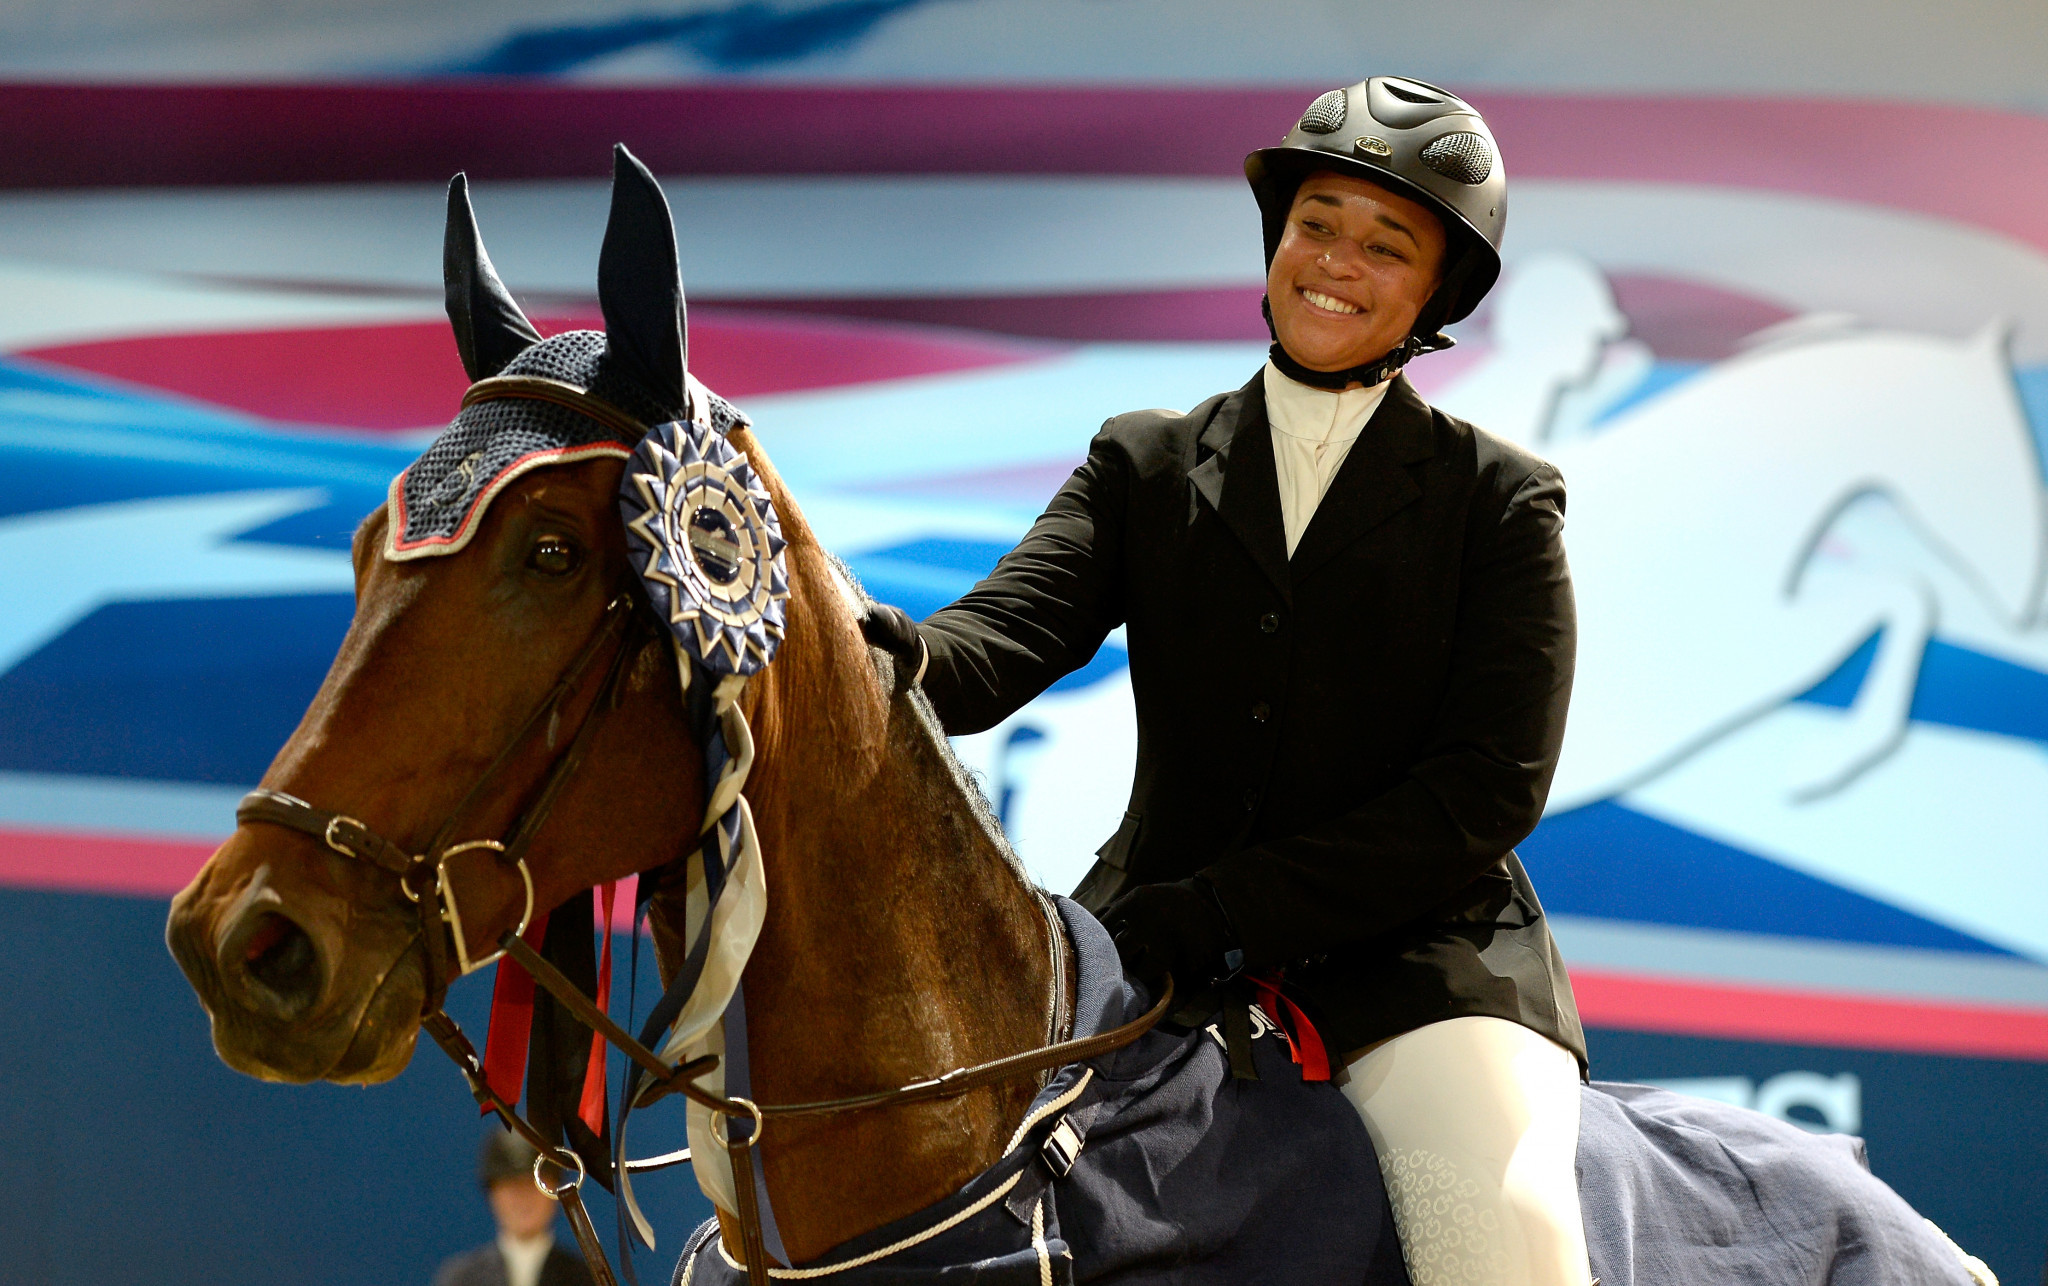 American jumper Johnson has one-year FEI ban reduced to three months following CAS appeal